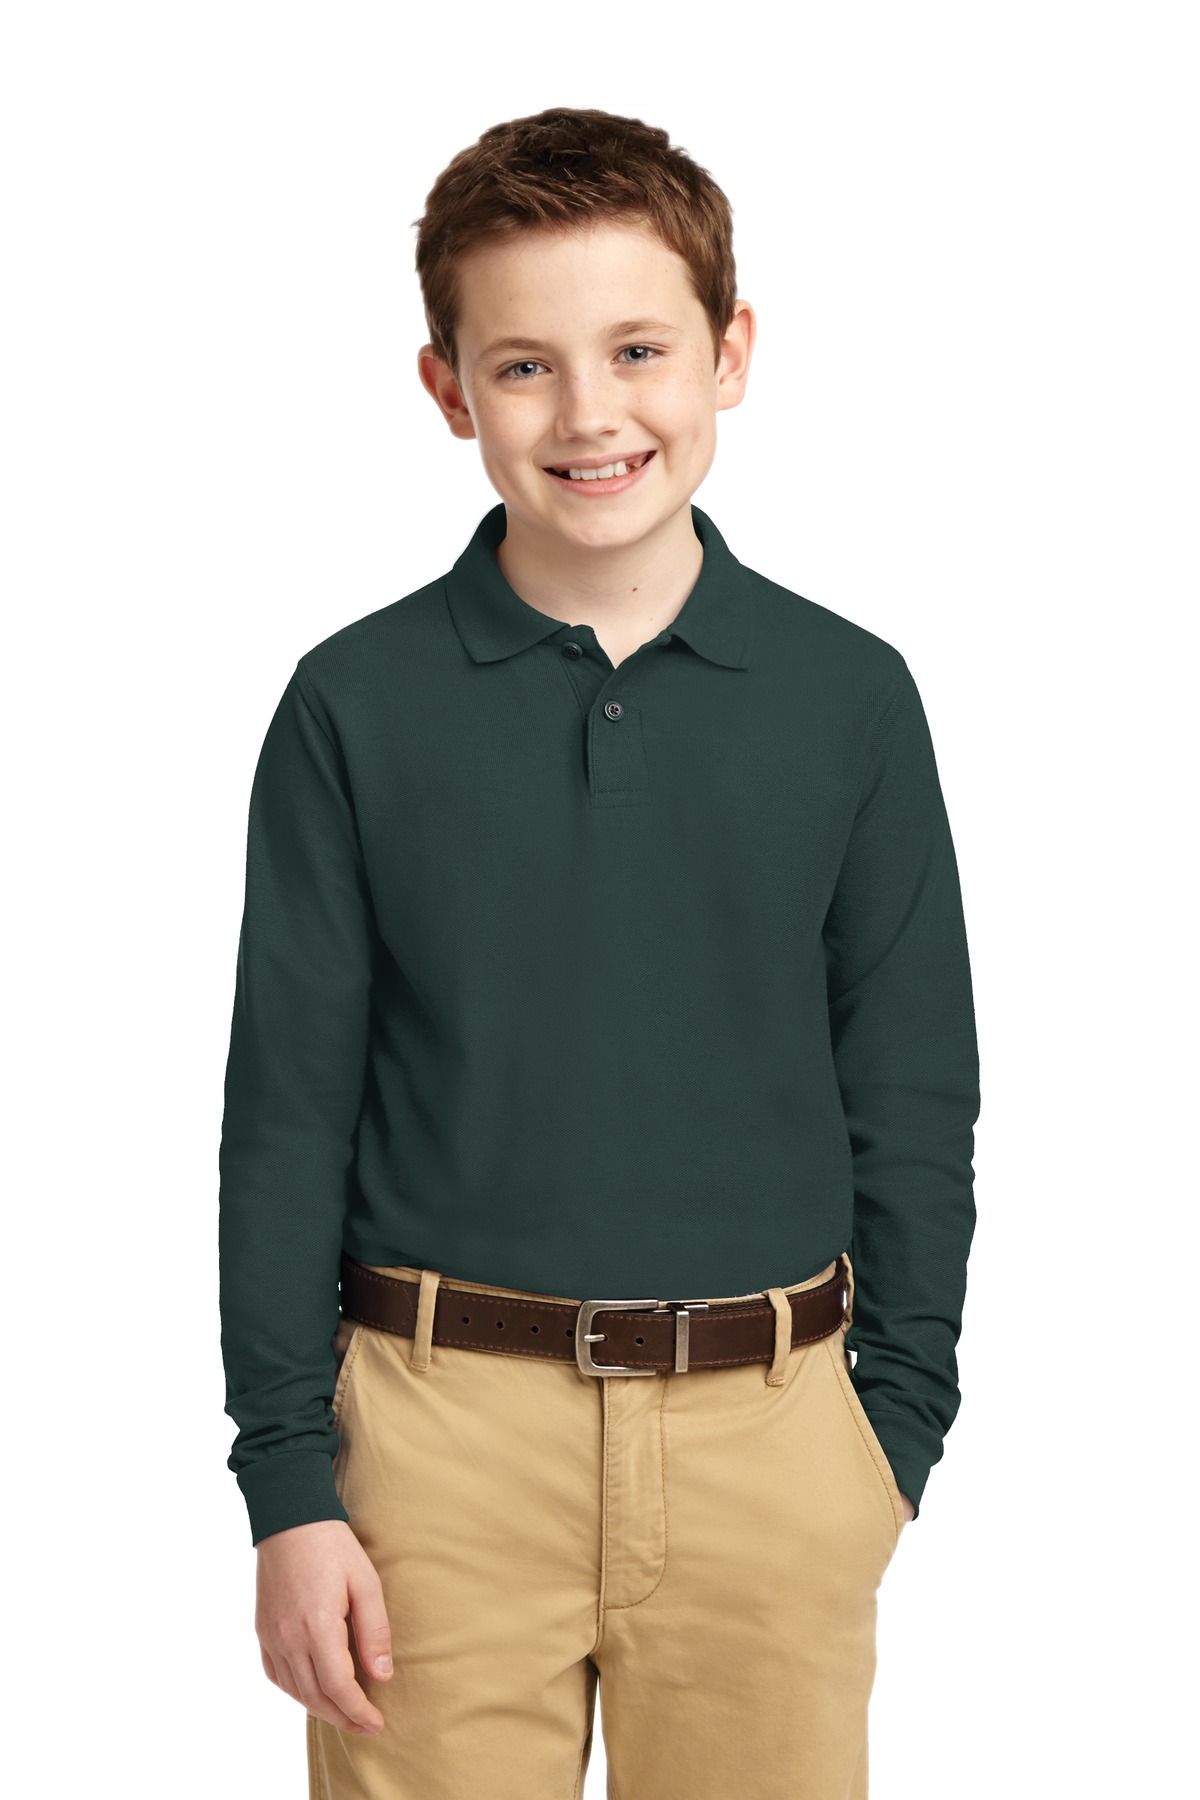 Y500LSYouth Long Sleeve Silk Touch Polo